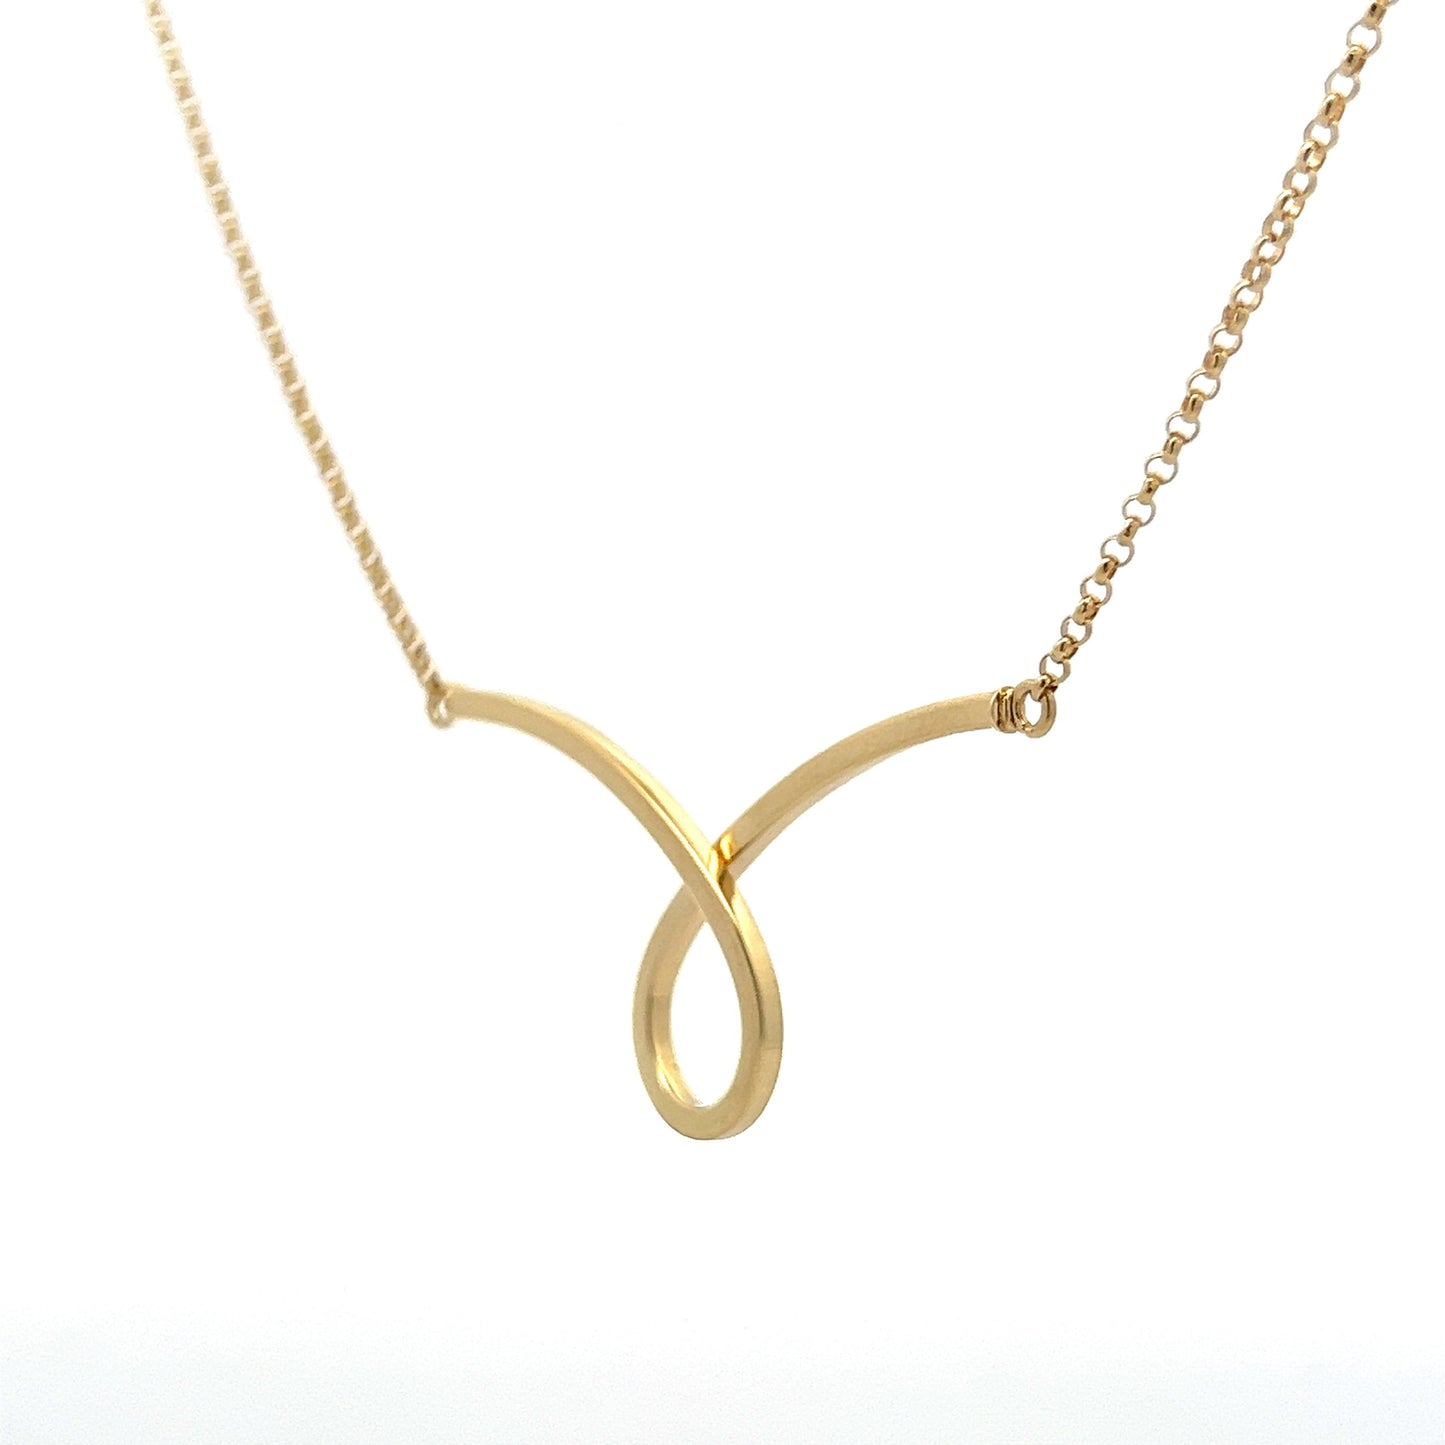 Loop Pendant Necklace in 14k Yellow Gold